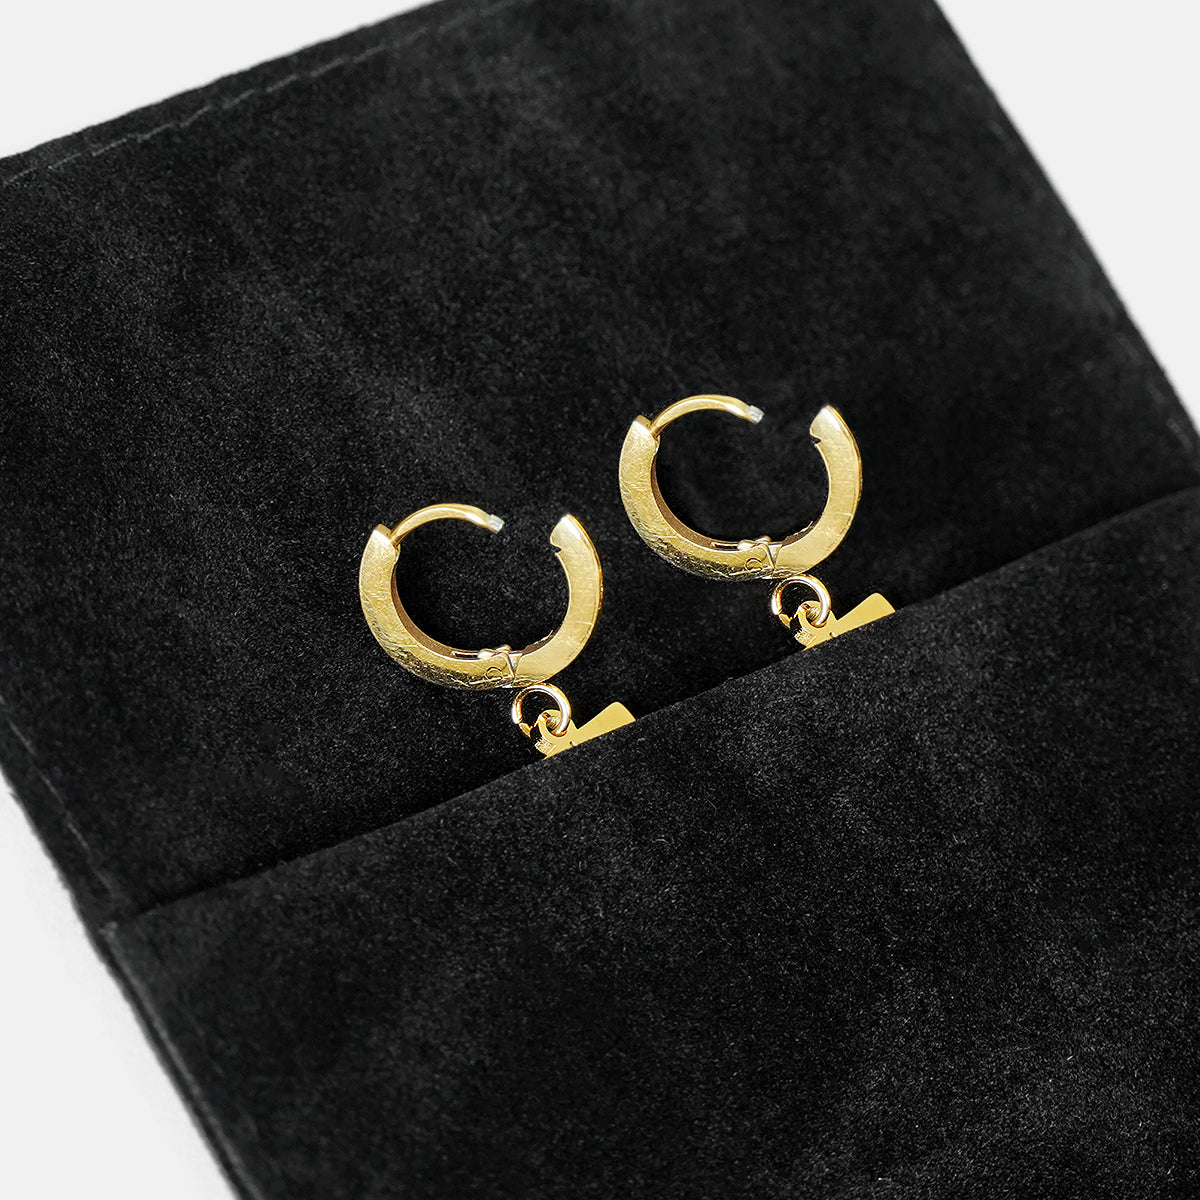 88 Number Earring - Gold Plated Stainless Steel